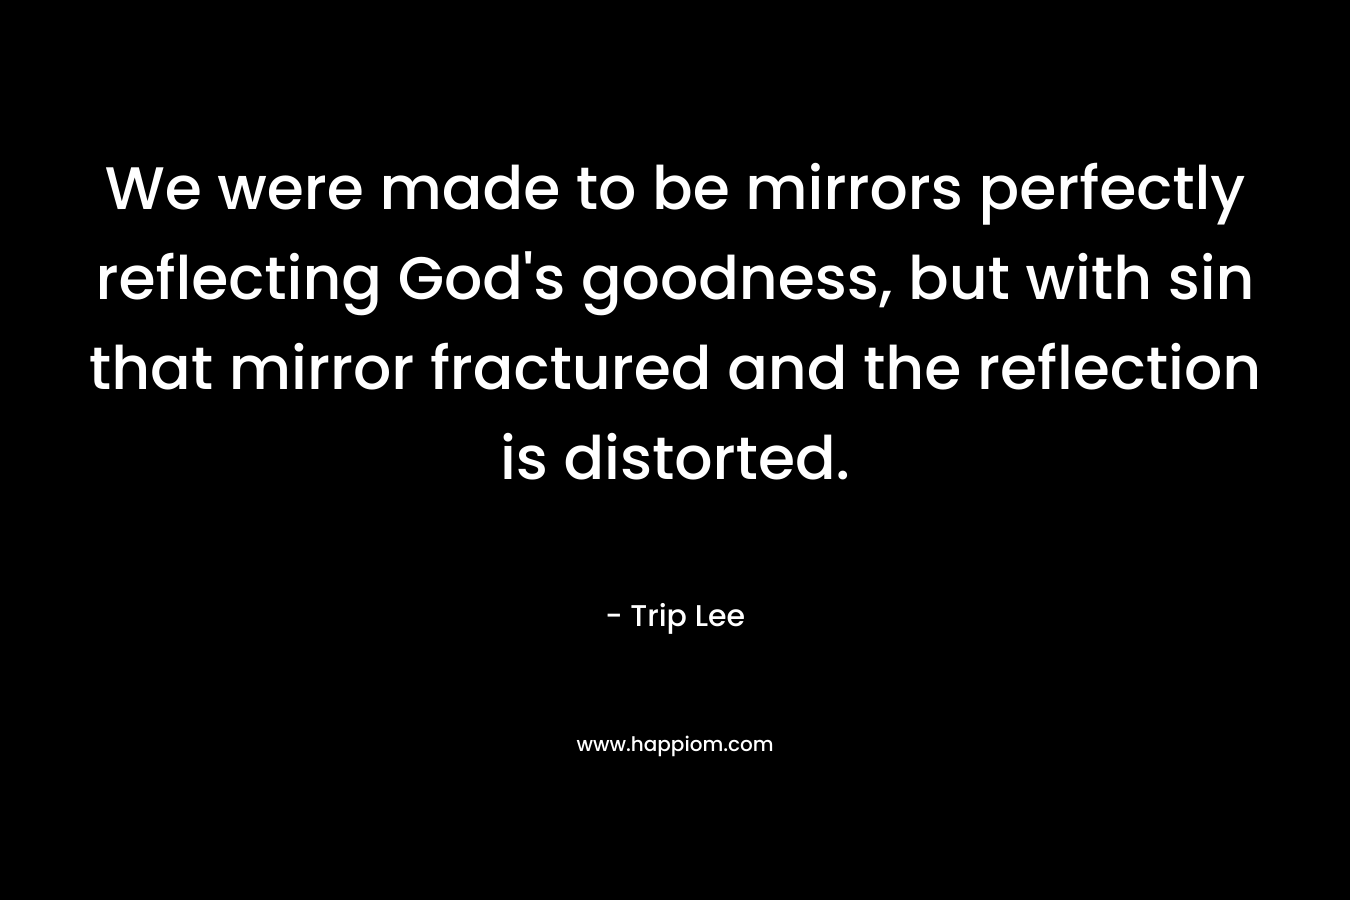 We were made to be mirrors perfectly reflecting God’s goodness, but with sin that mirror fractured and the reflection is distorted. – Trip Lee